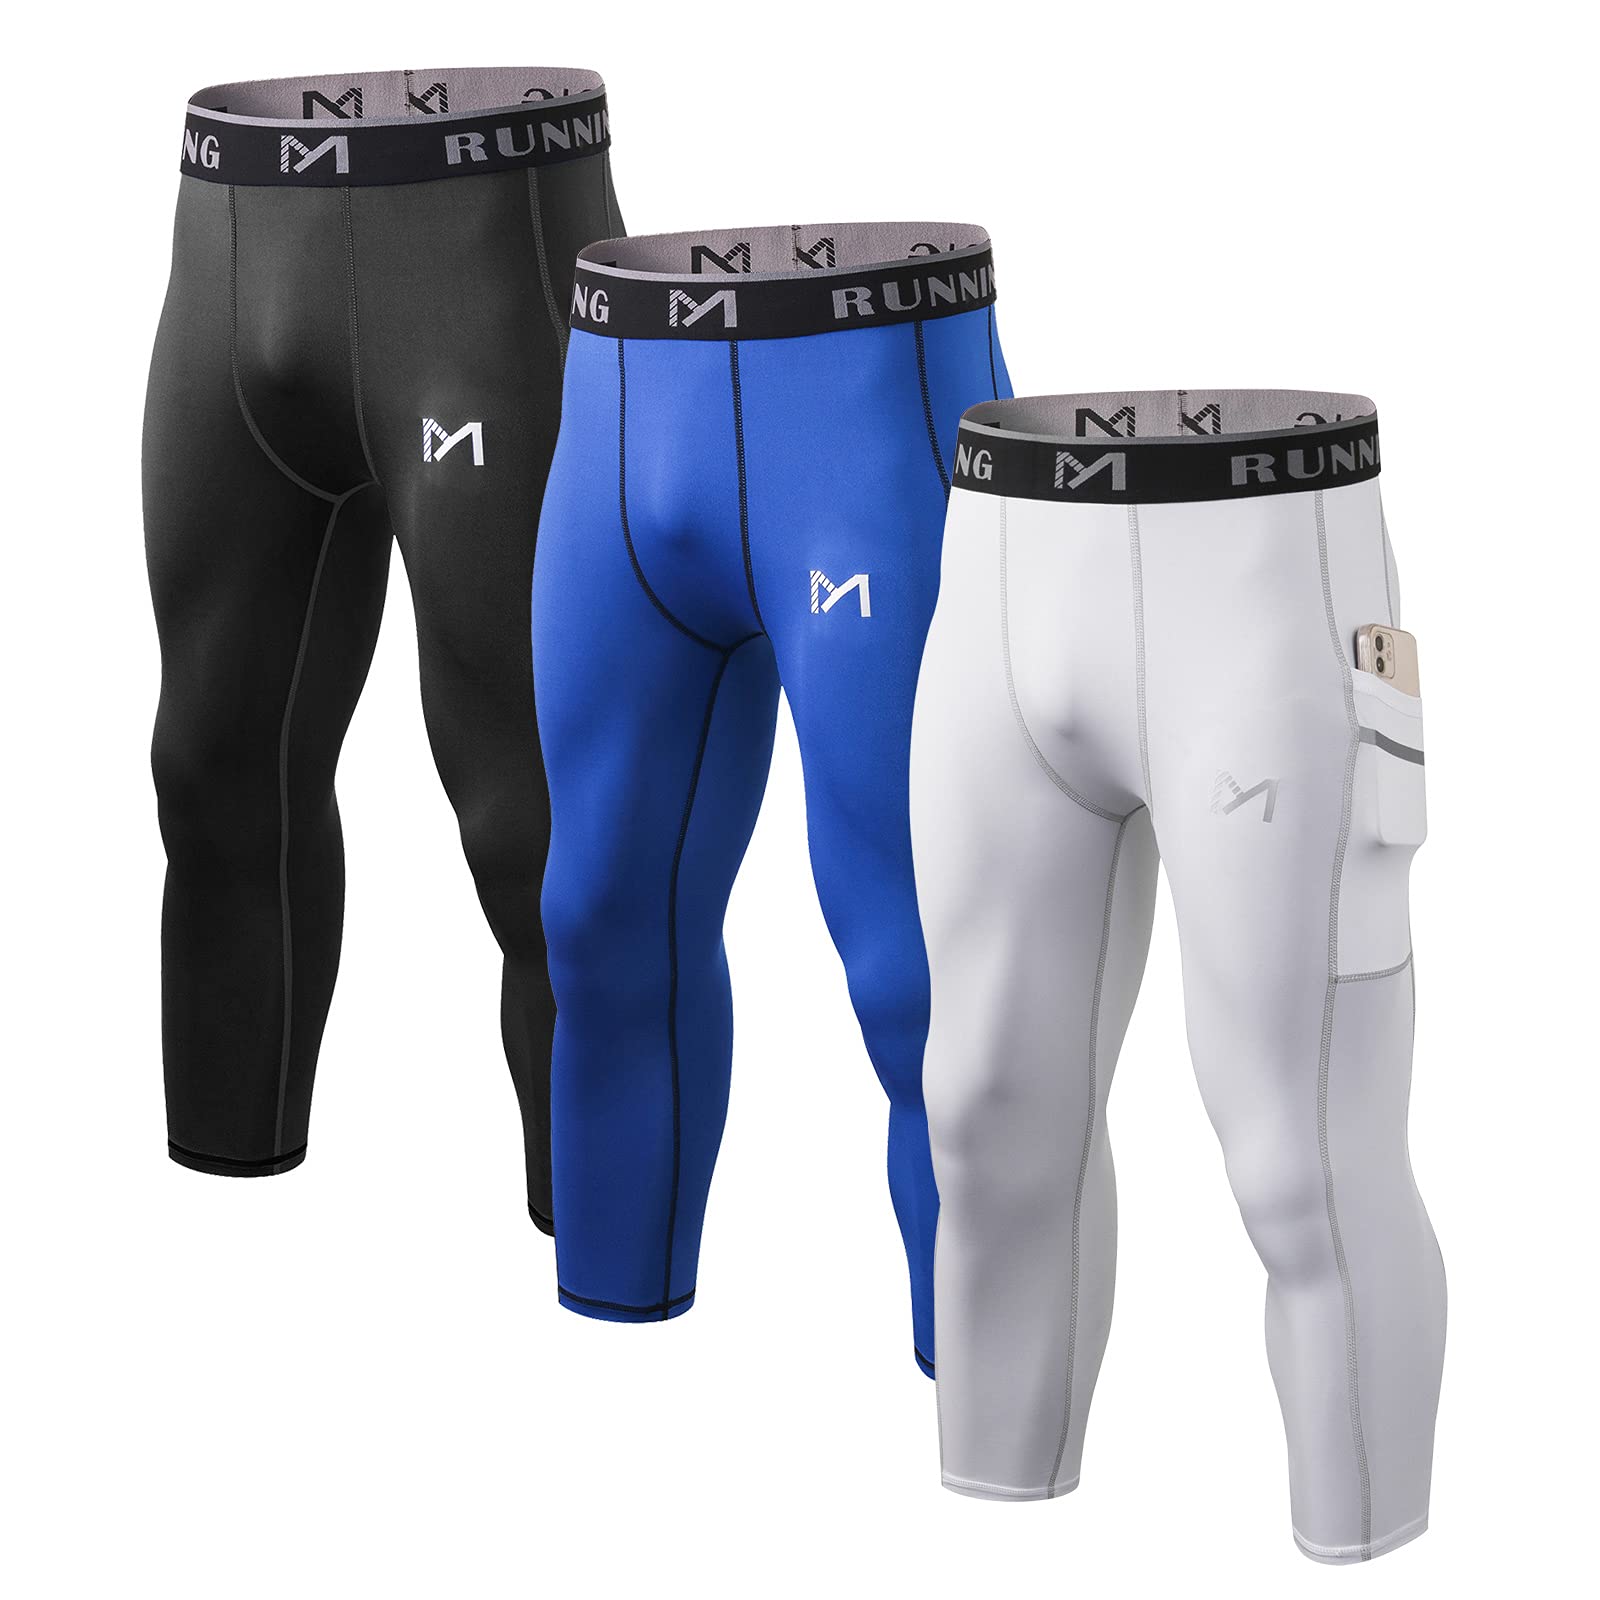 MEETYOO Men's 3/4 Compression Pants with Pockets X-Large Black+white+blue